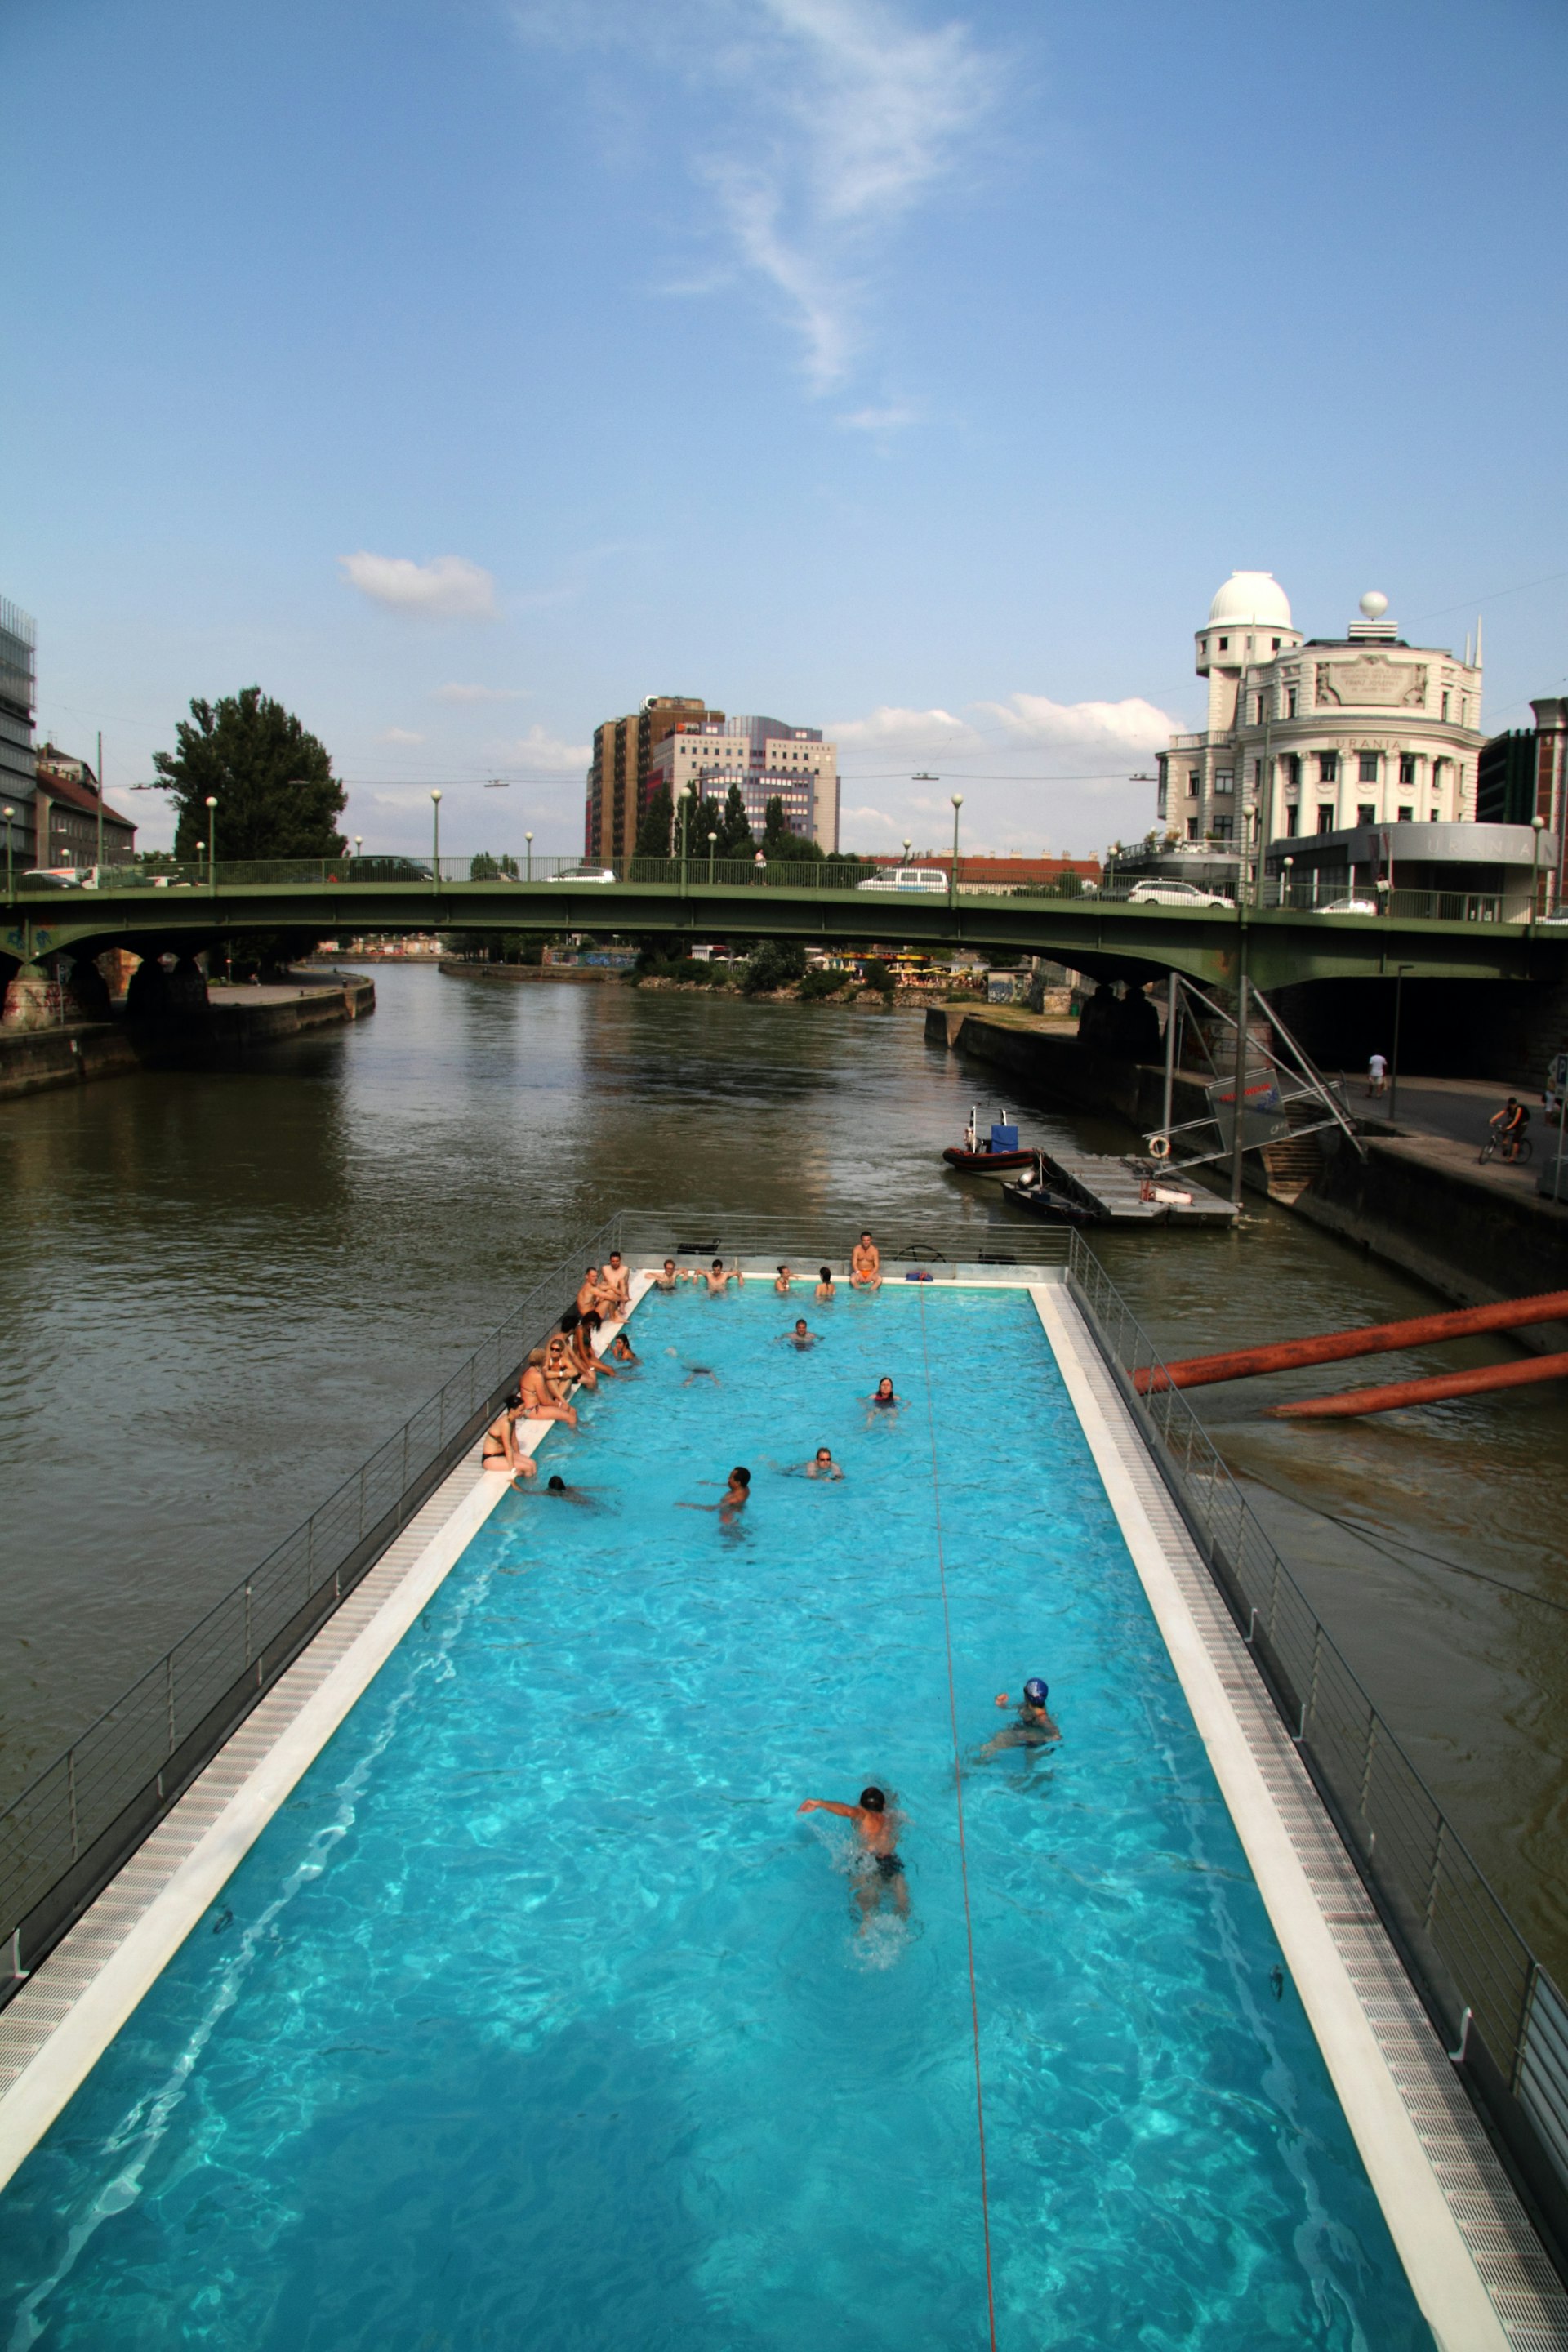 Features - Badeschiff (bathing ship), floating public swiming pool on Danube River.